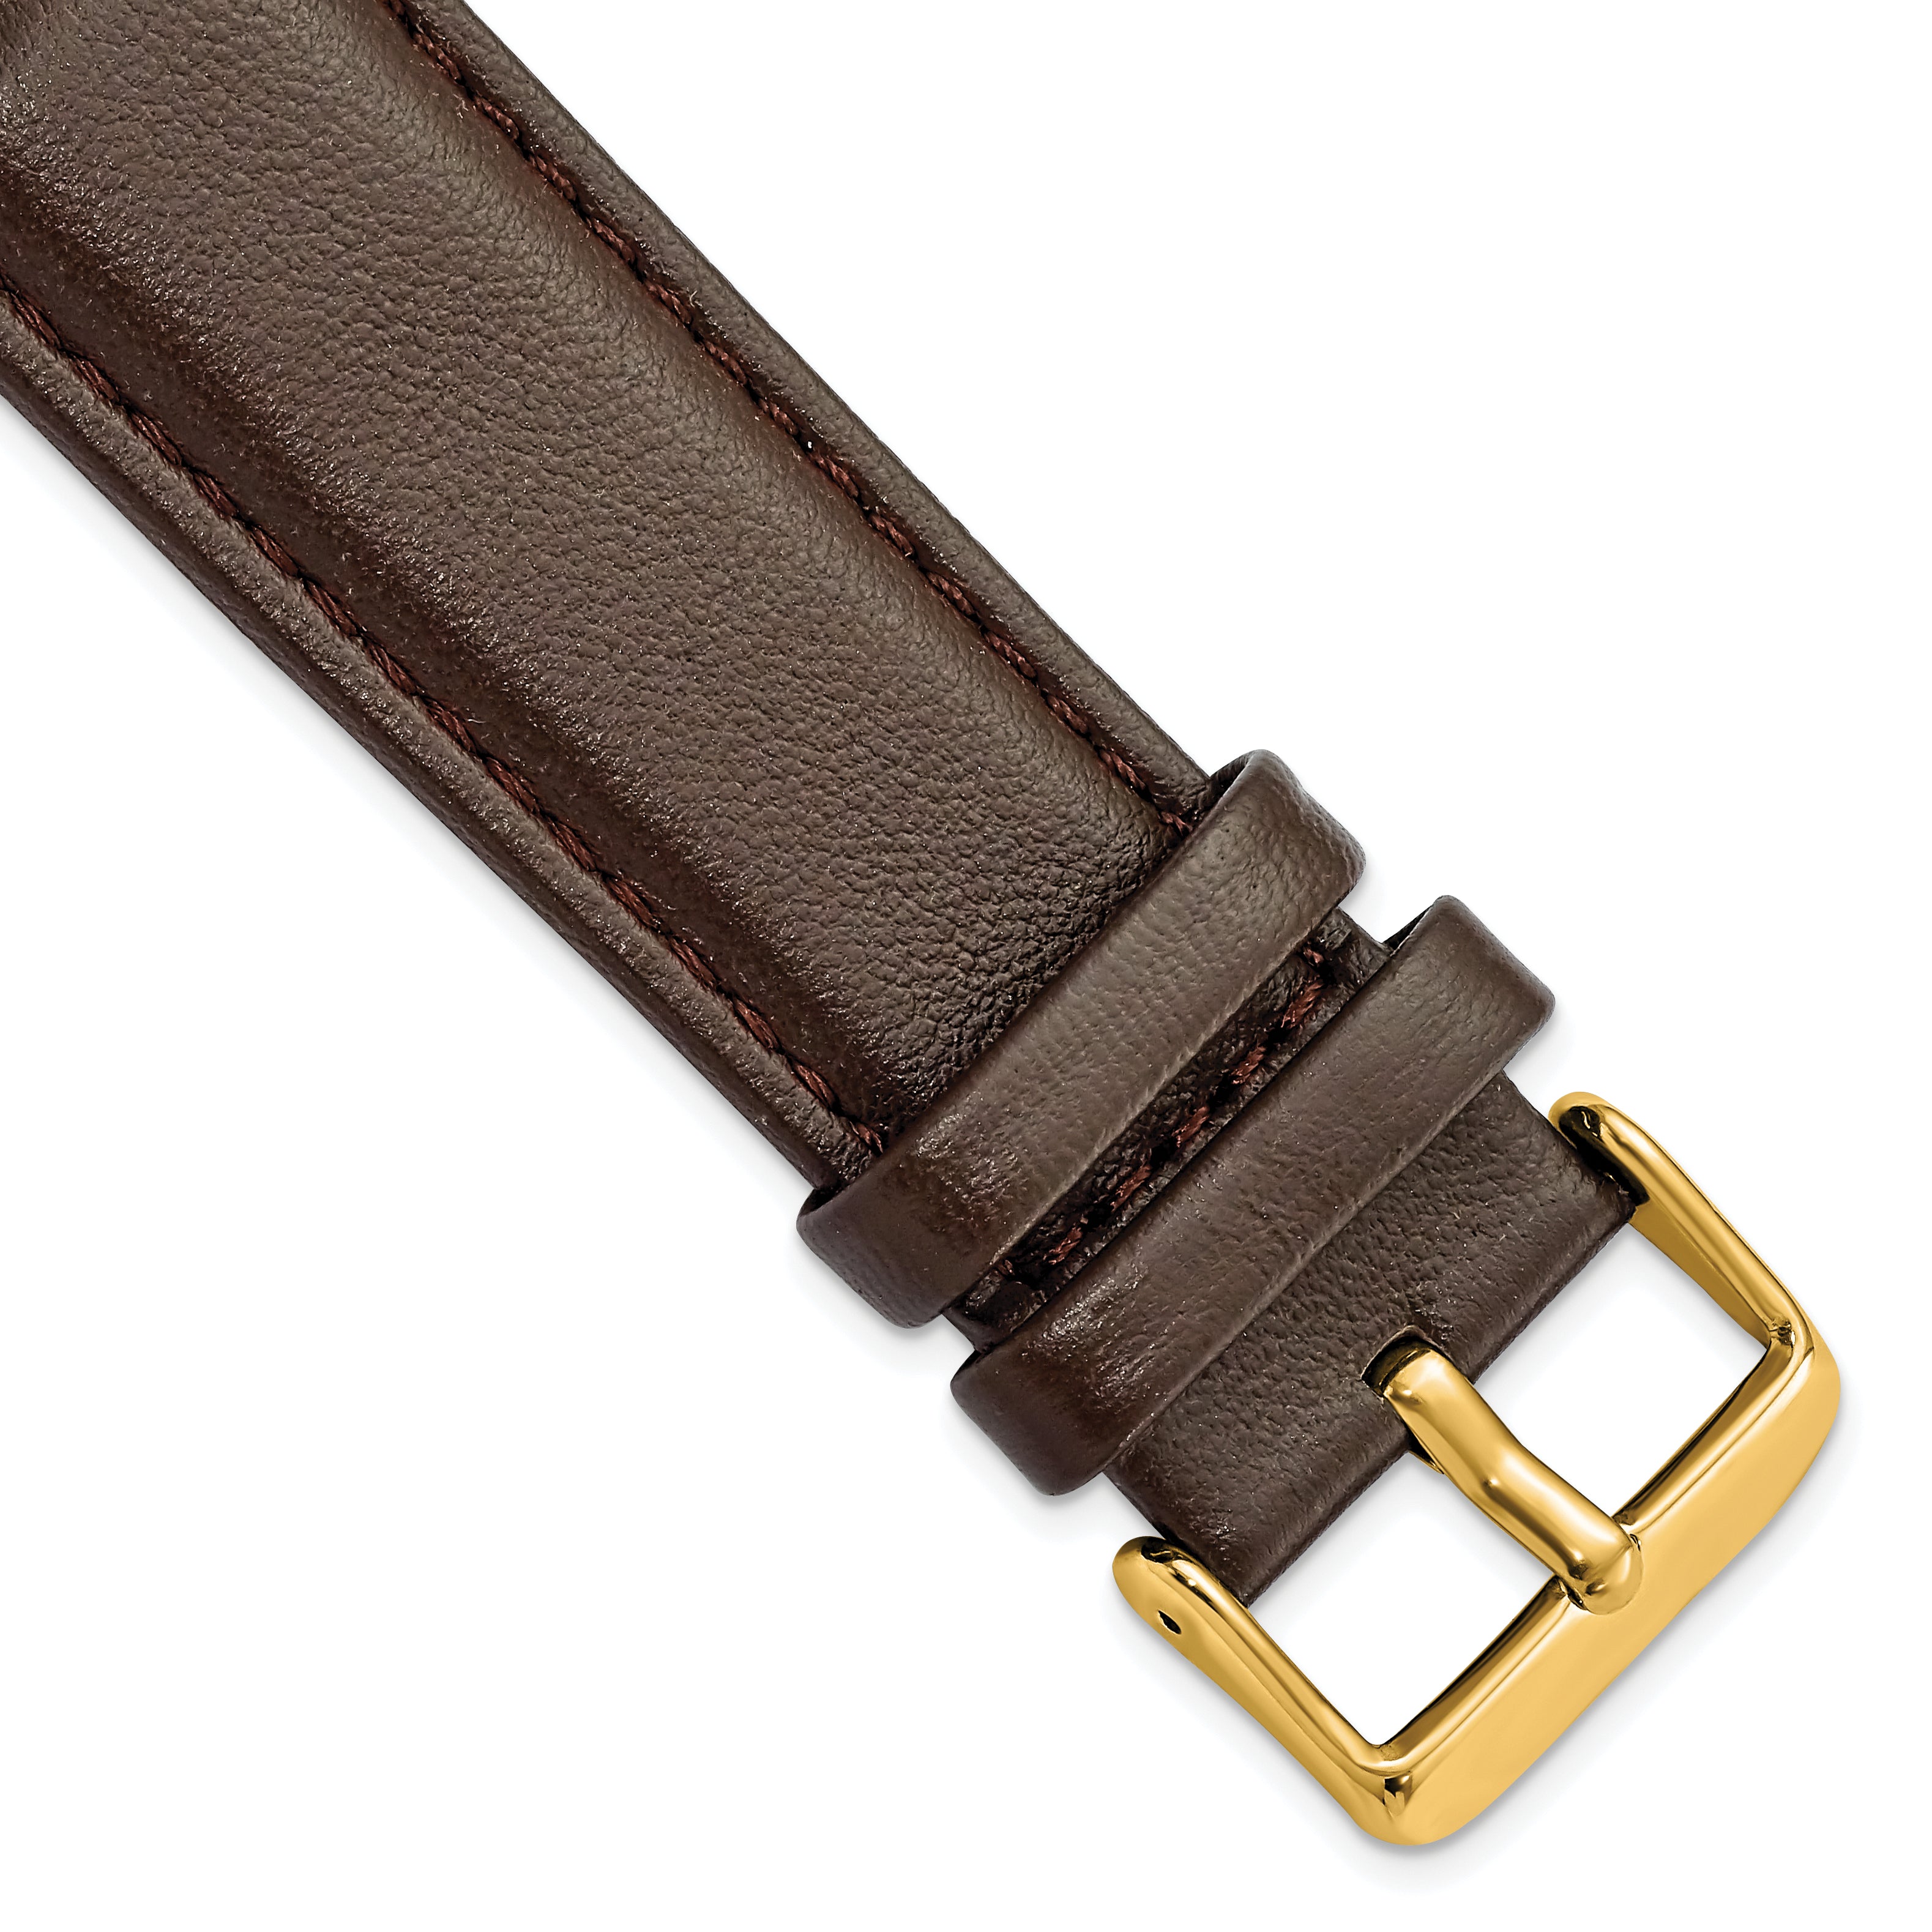 DeBeer 24mm Dark Brown Glove Leather with Gold-tone Panerai Style Buckle 7.75 inch Watch Band